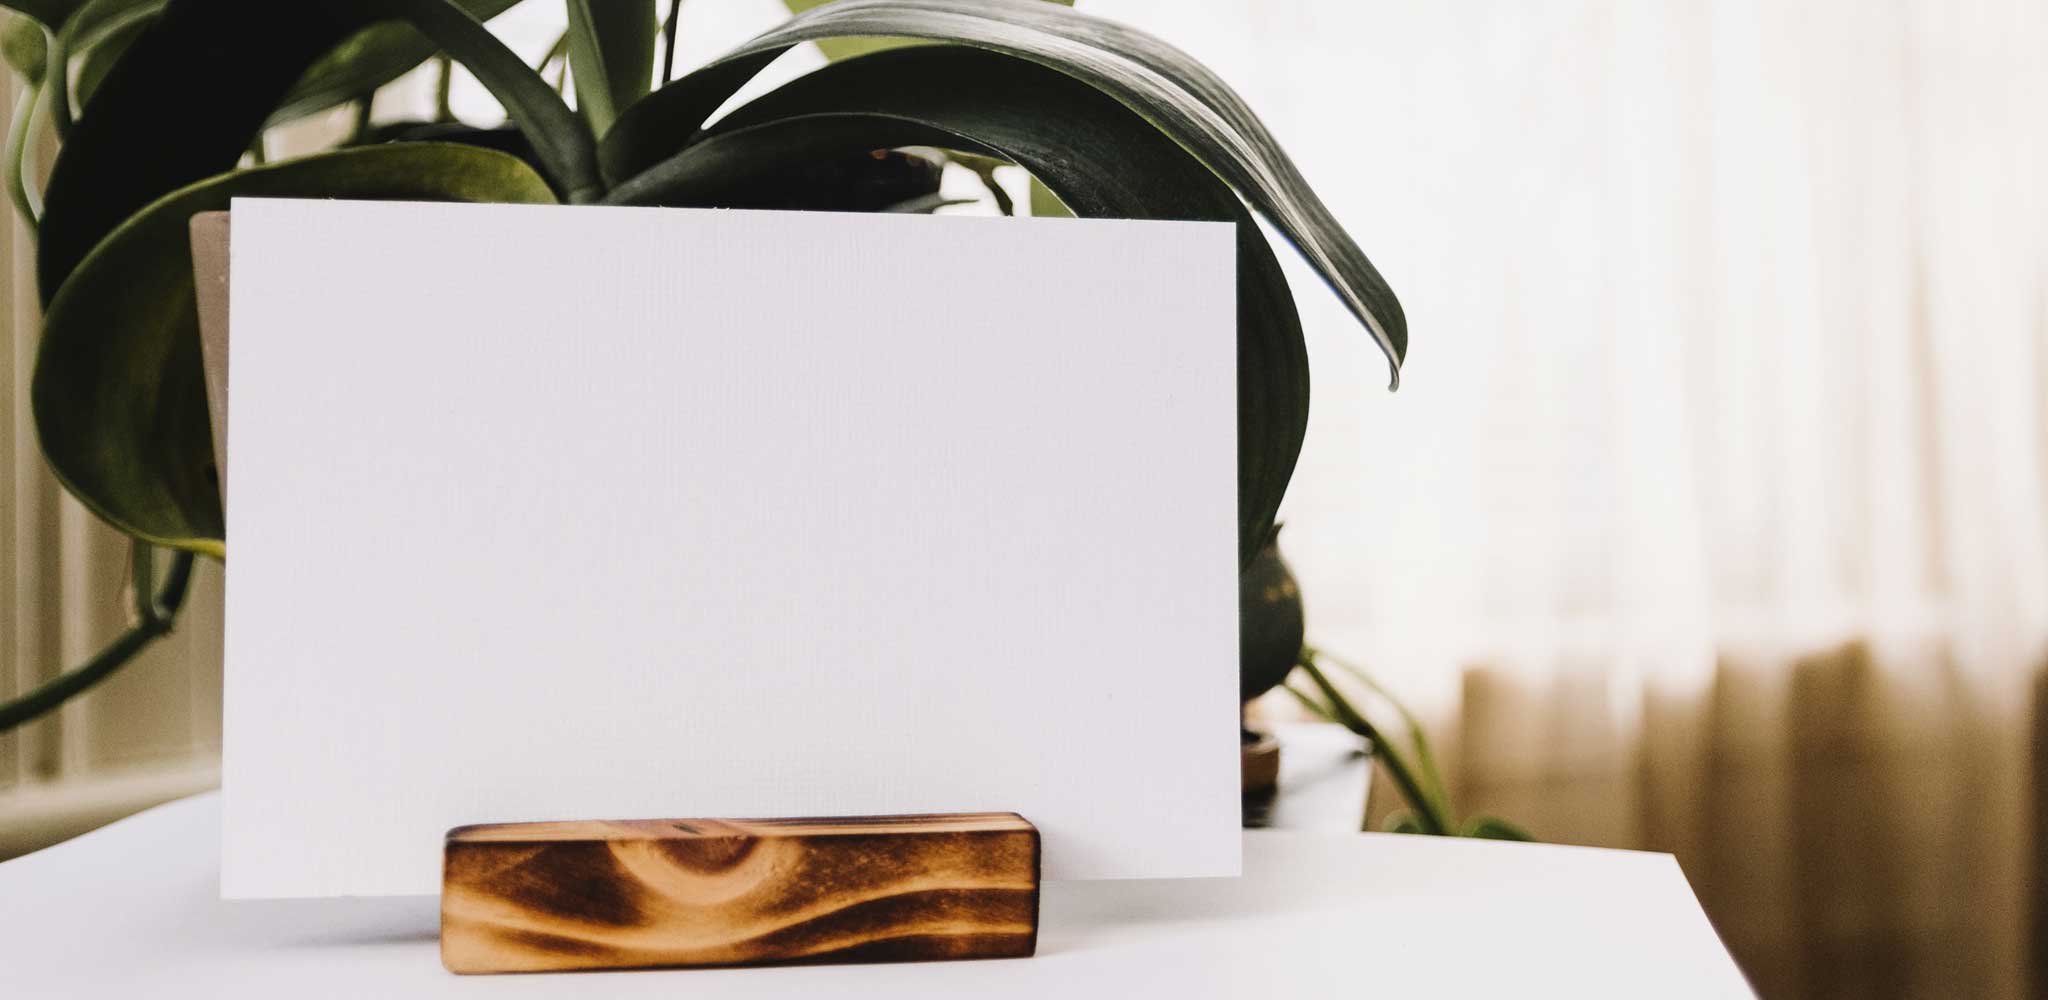 image of a white piece of paper in a wooden stand on a table